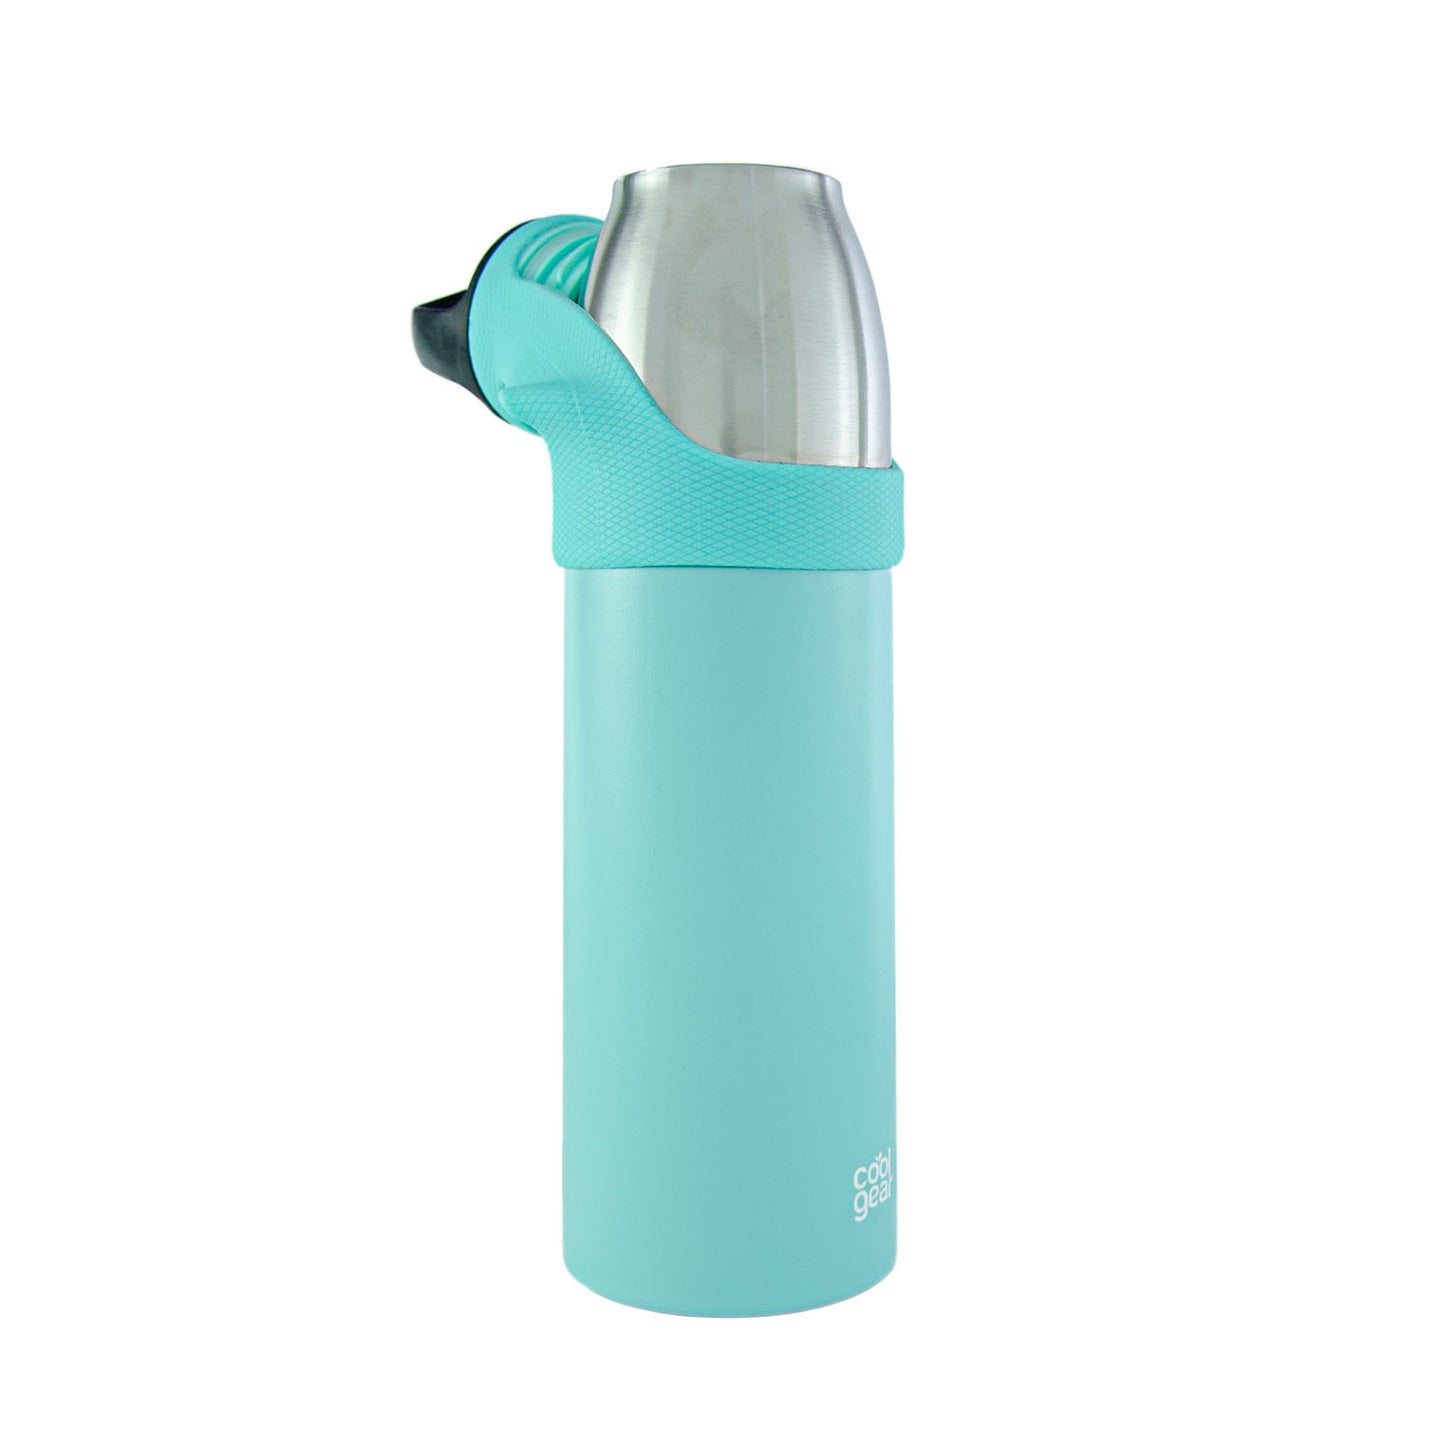 Sale Products, Water Bottles, Tumblers & Other Gear